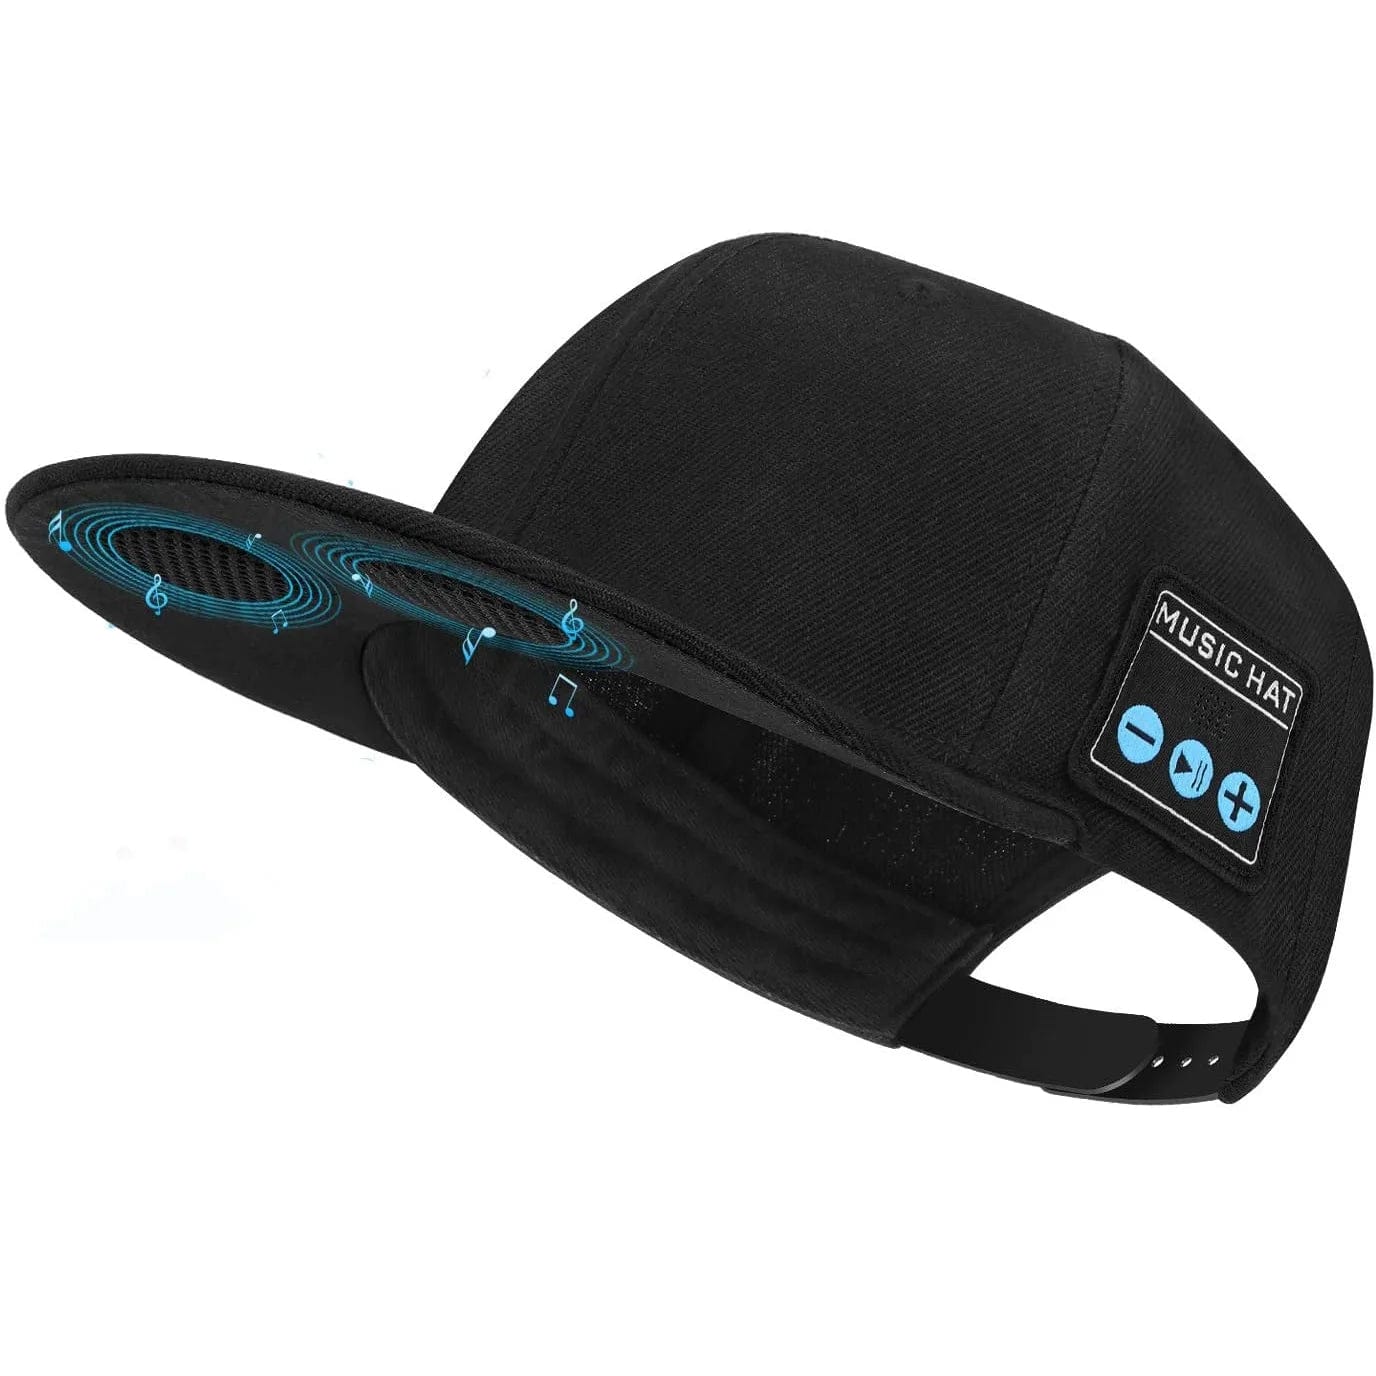 HomeBound Essentials Black / CHINA Bluetooth Speaker Baseball Cap - Adjustable Hat with Mic for Wireless Music and Calls